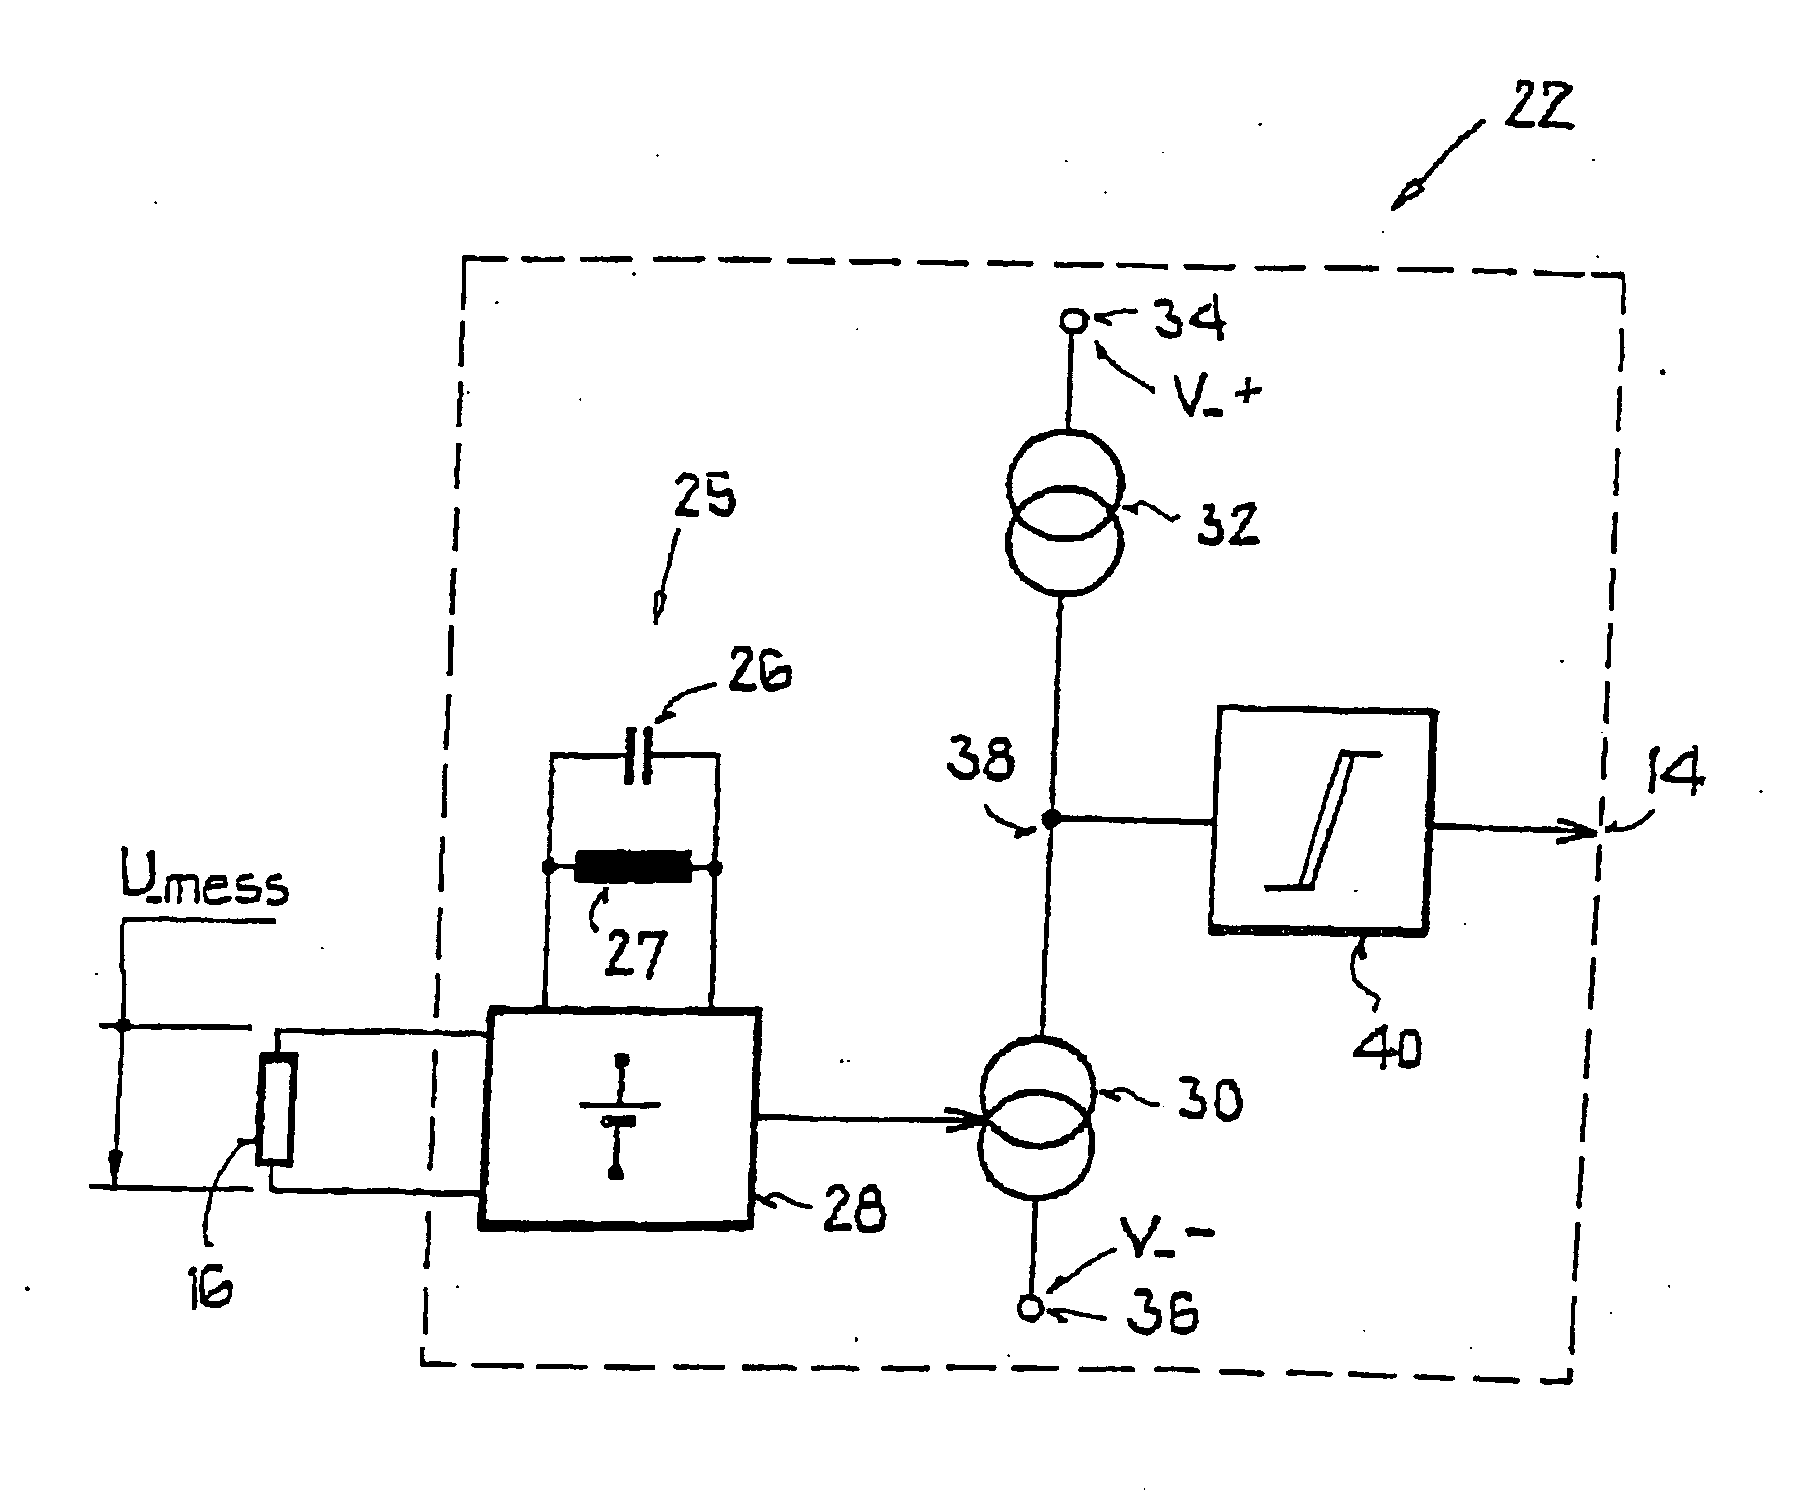 Operating and evaluation circuit of an insect sensor